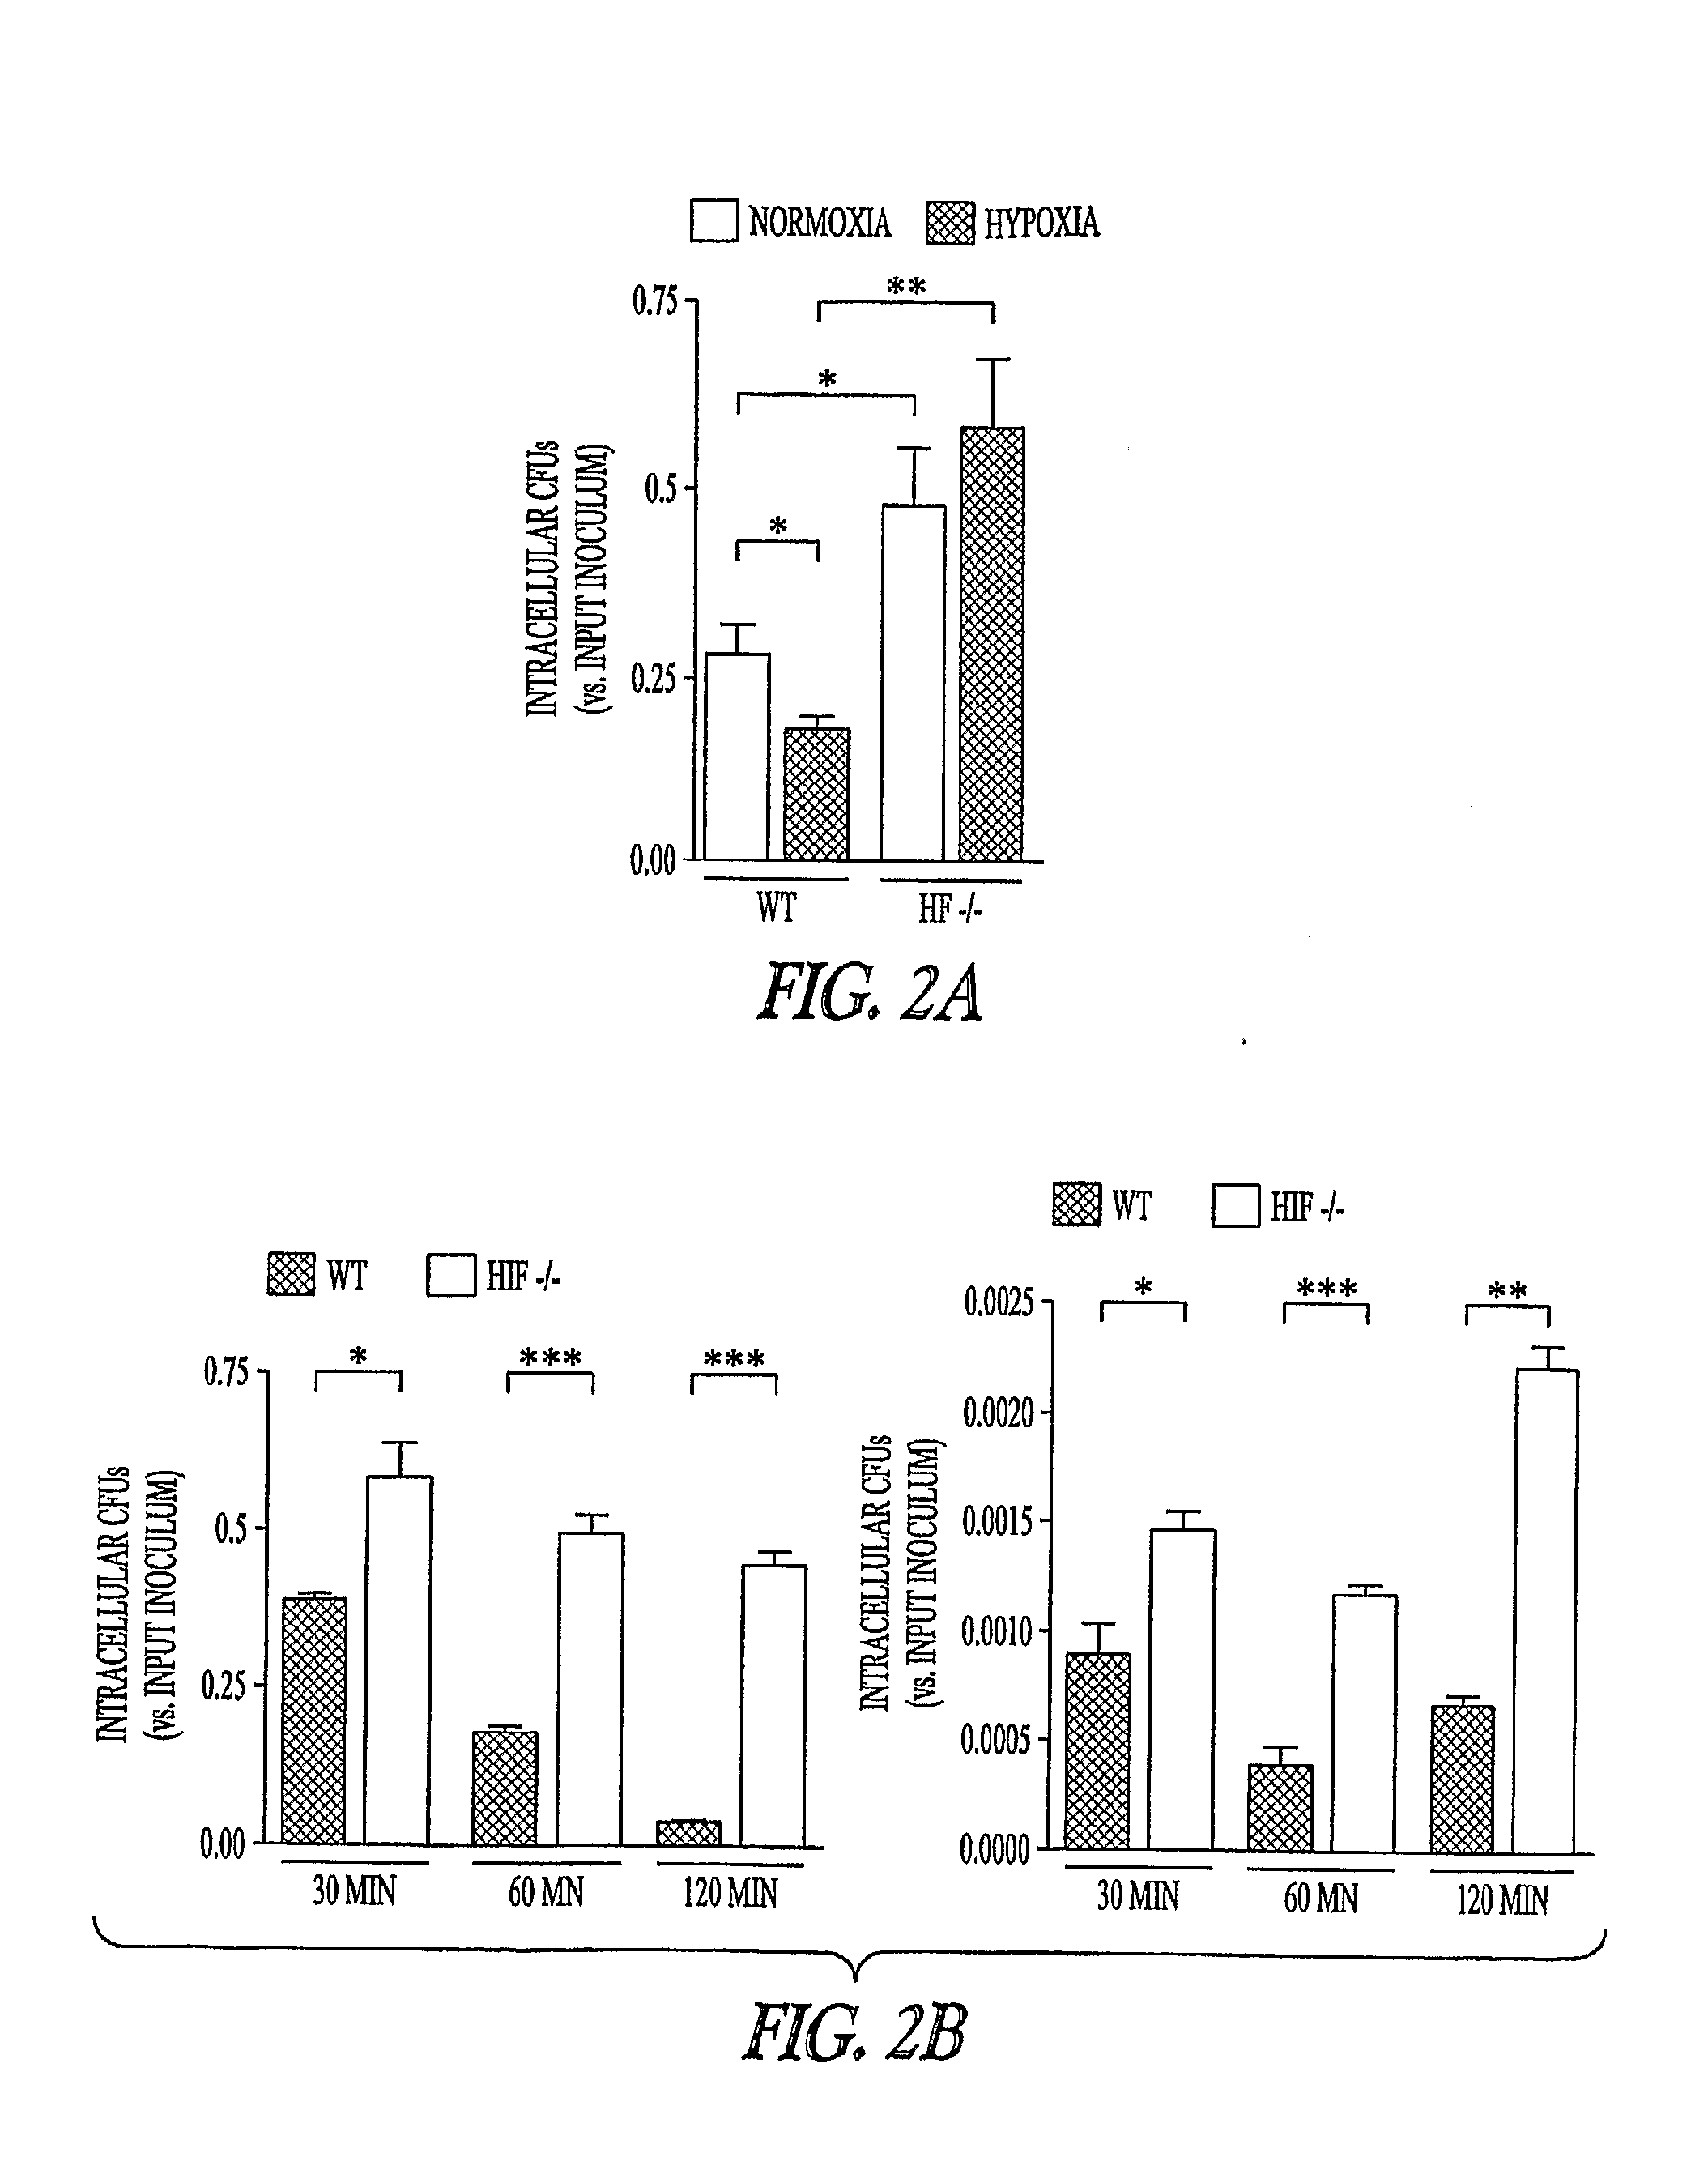 Hif Modulating Compounds and Methods of Use Thereof